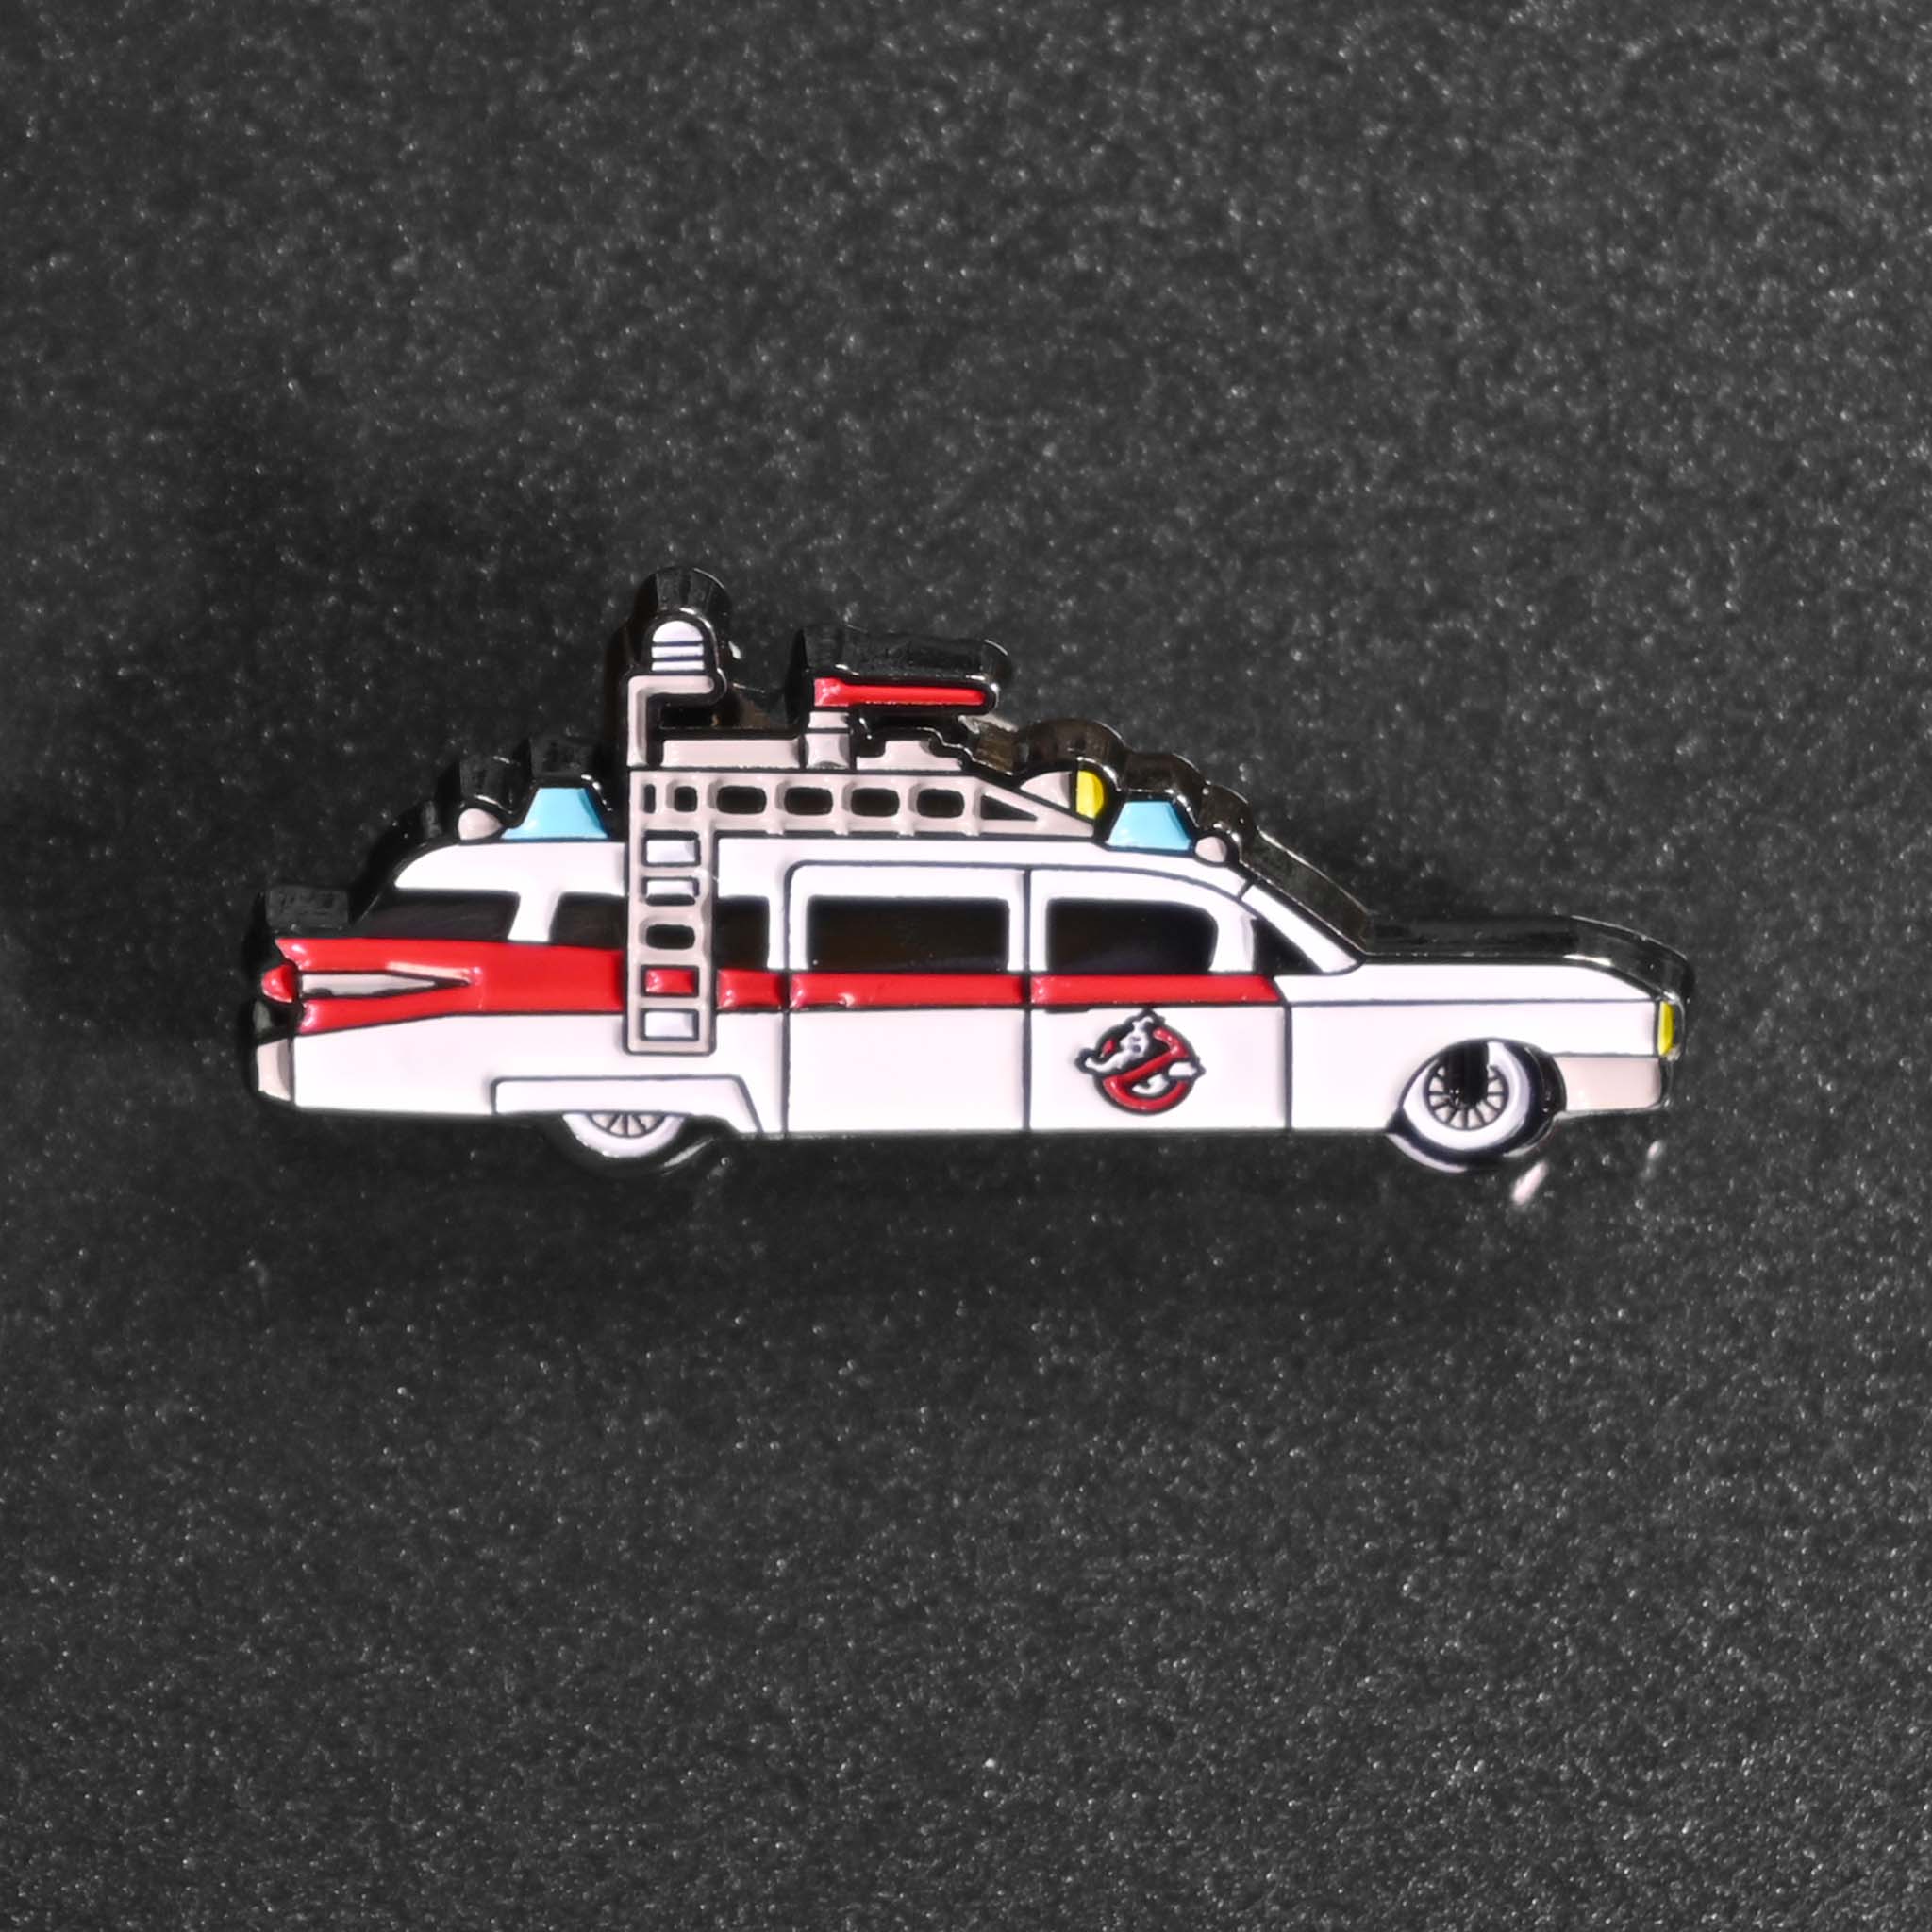 A cute enamel pin of the 1980s Ghostbusters car ECTO-1